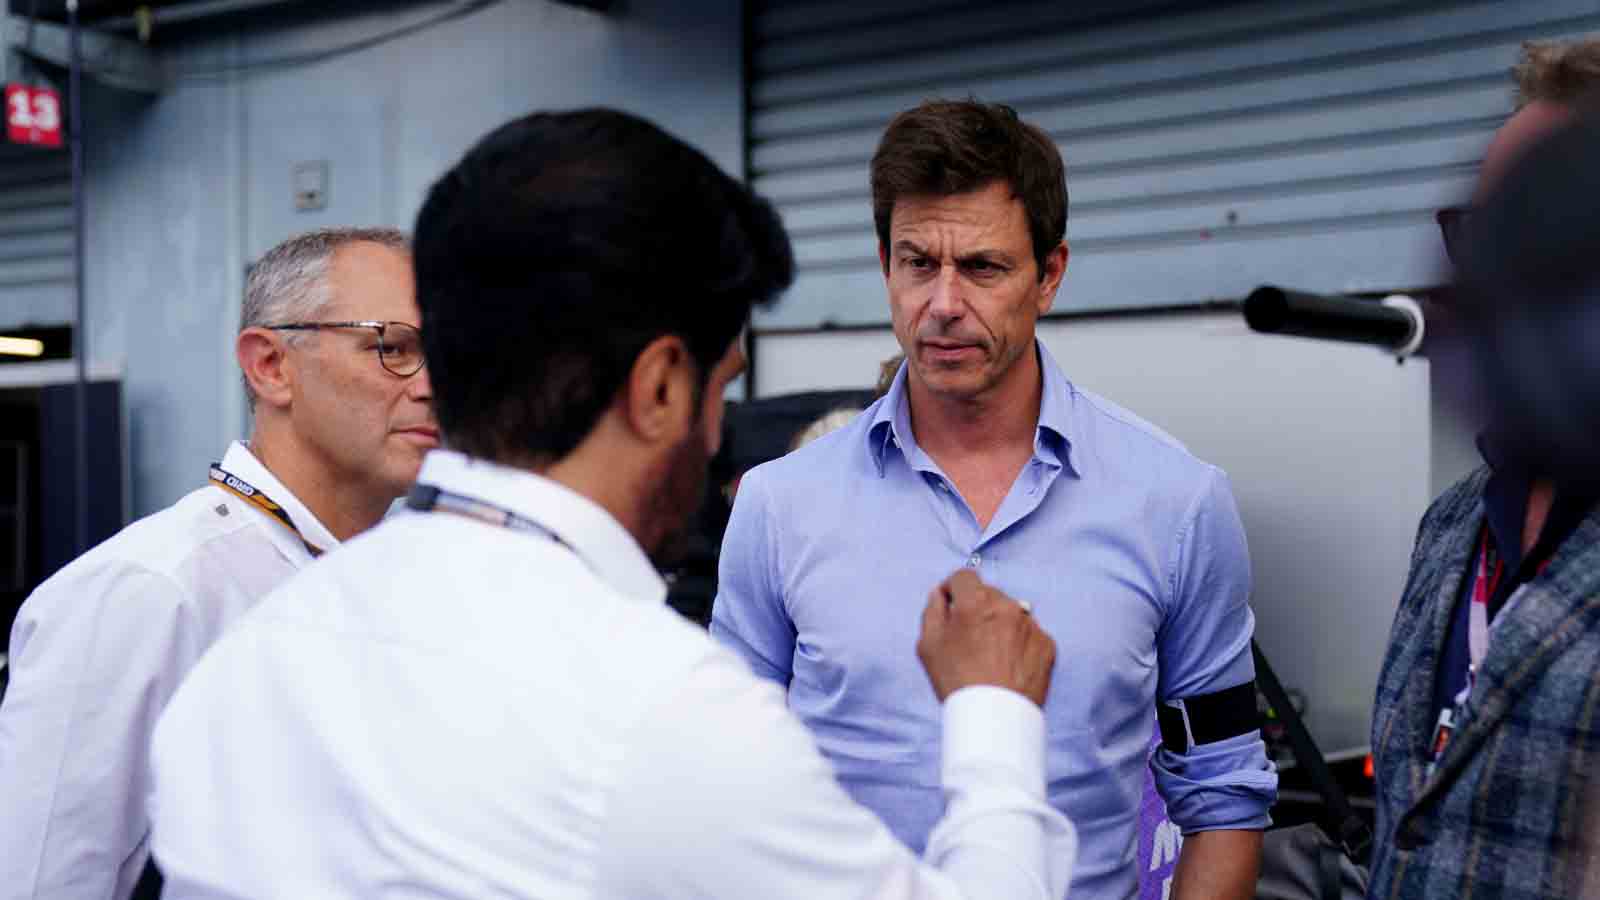 Toto Wolff speaks to FIA officials. Monza September 2022.